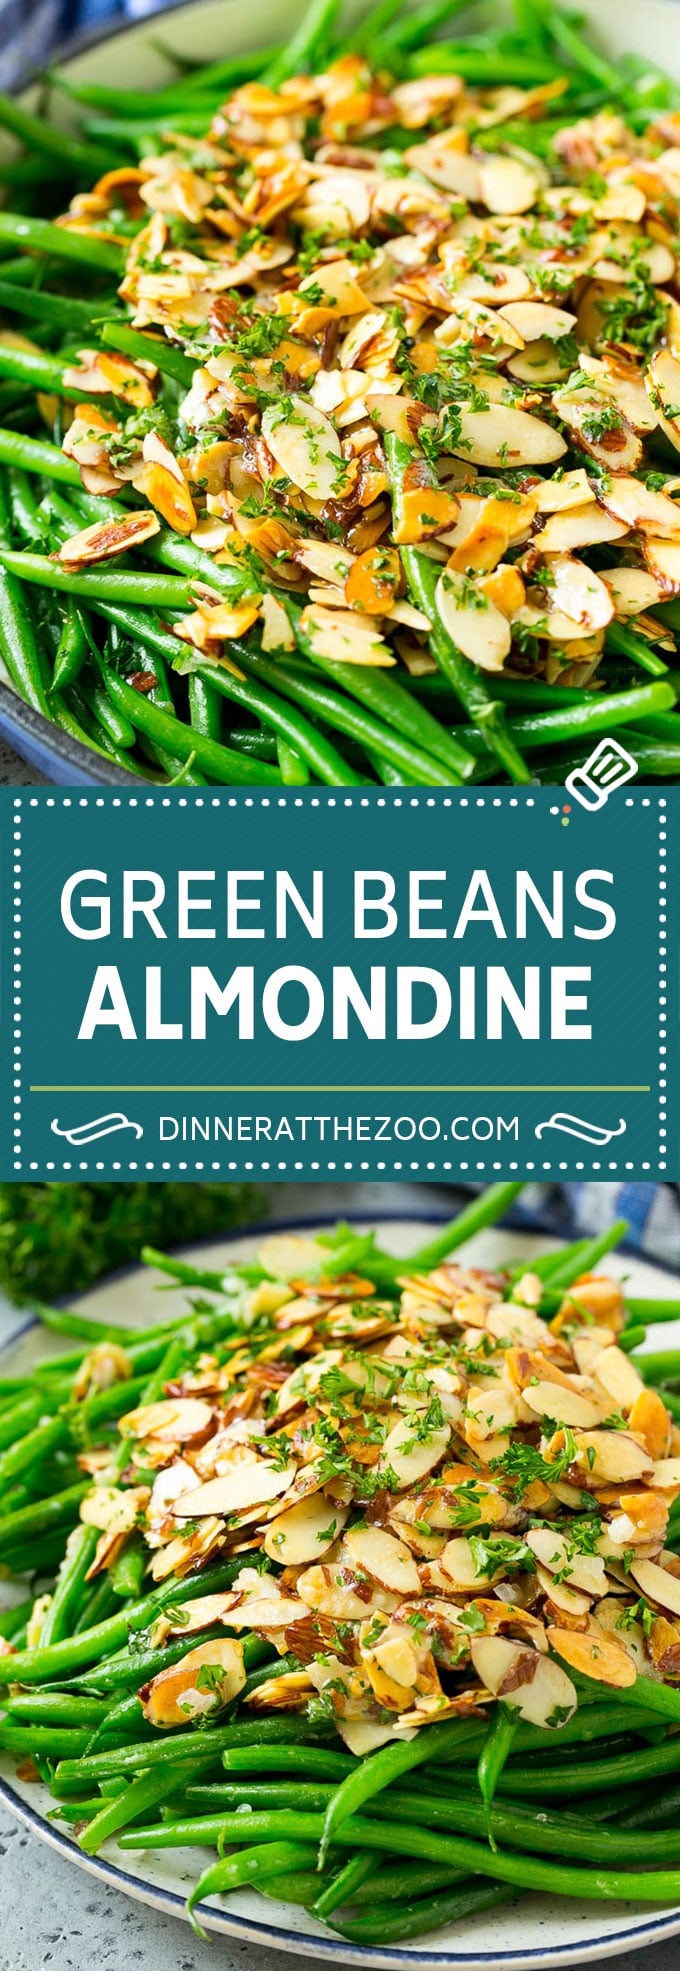 Green Beans Almondine Recipe | Green Beans with Almonds | Green Bean Recipe #greenbeans #almonds #sidedish #glutenfree #lowcarb #keto #dinner #dinneratthezoo